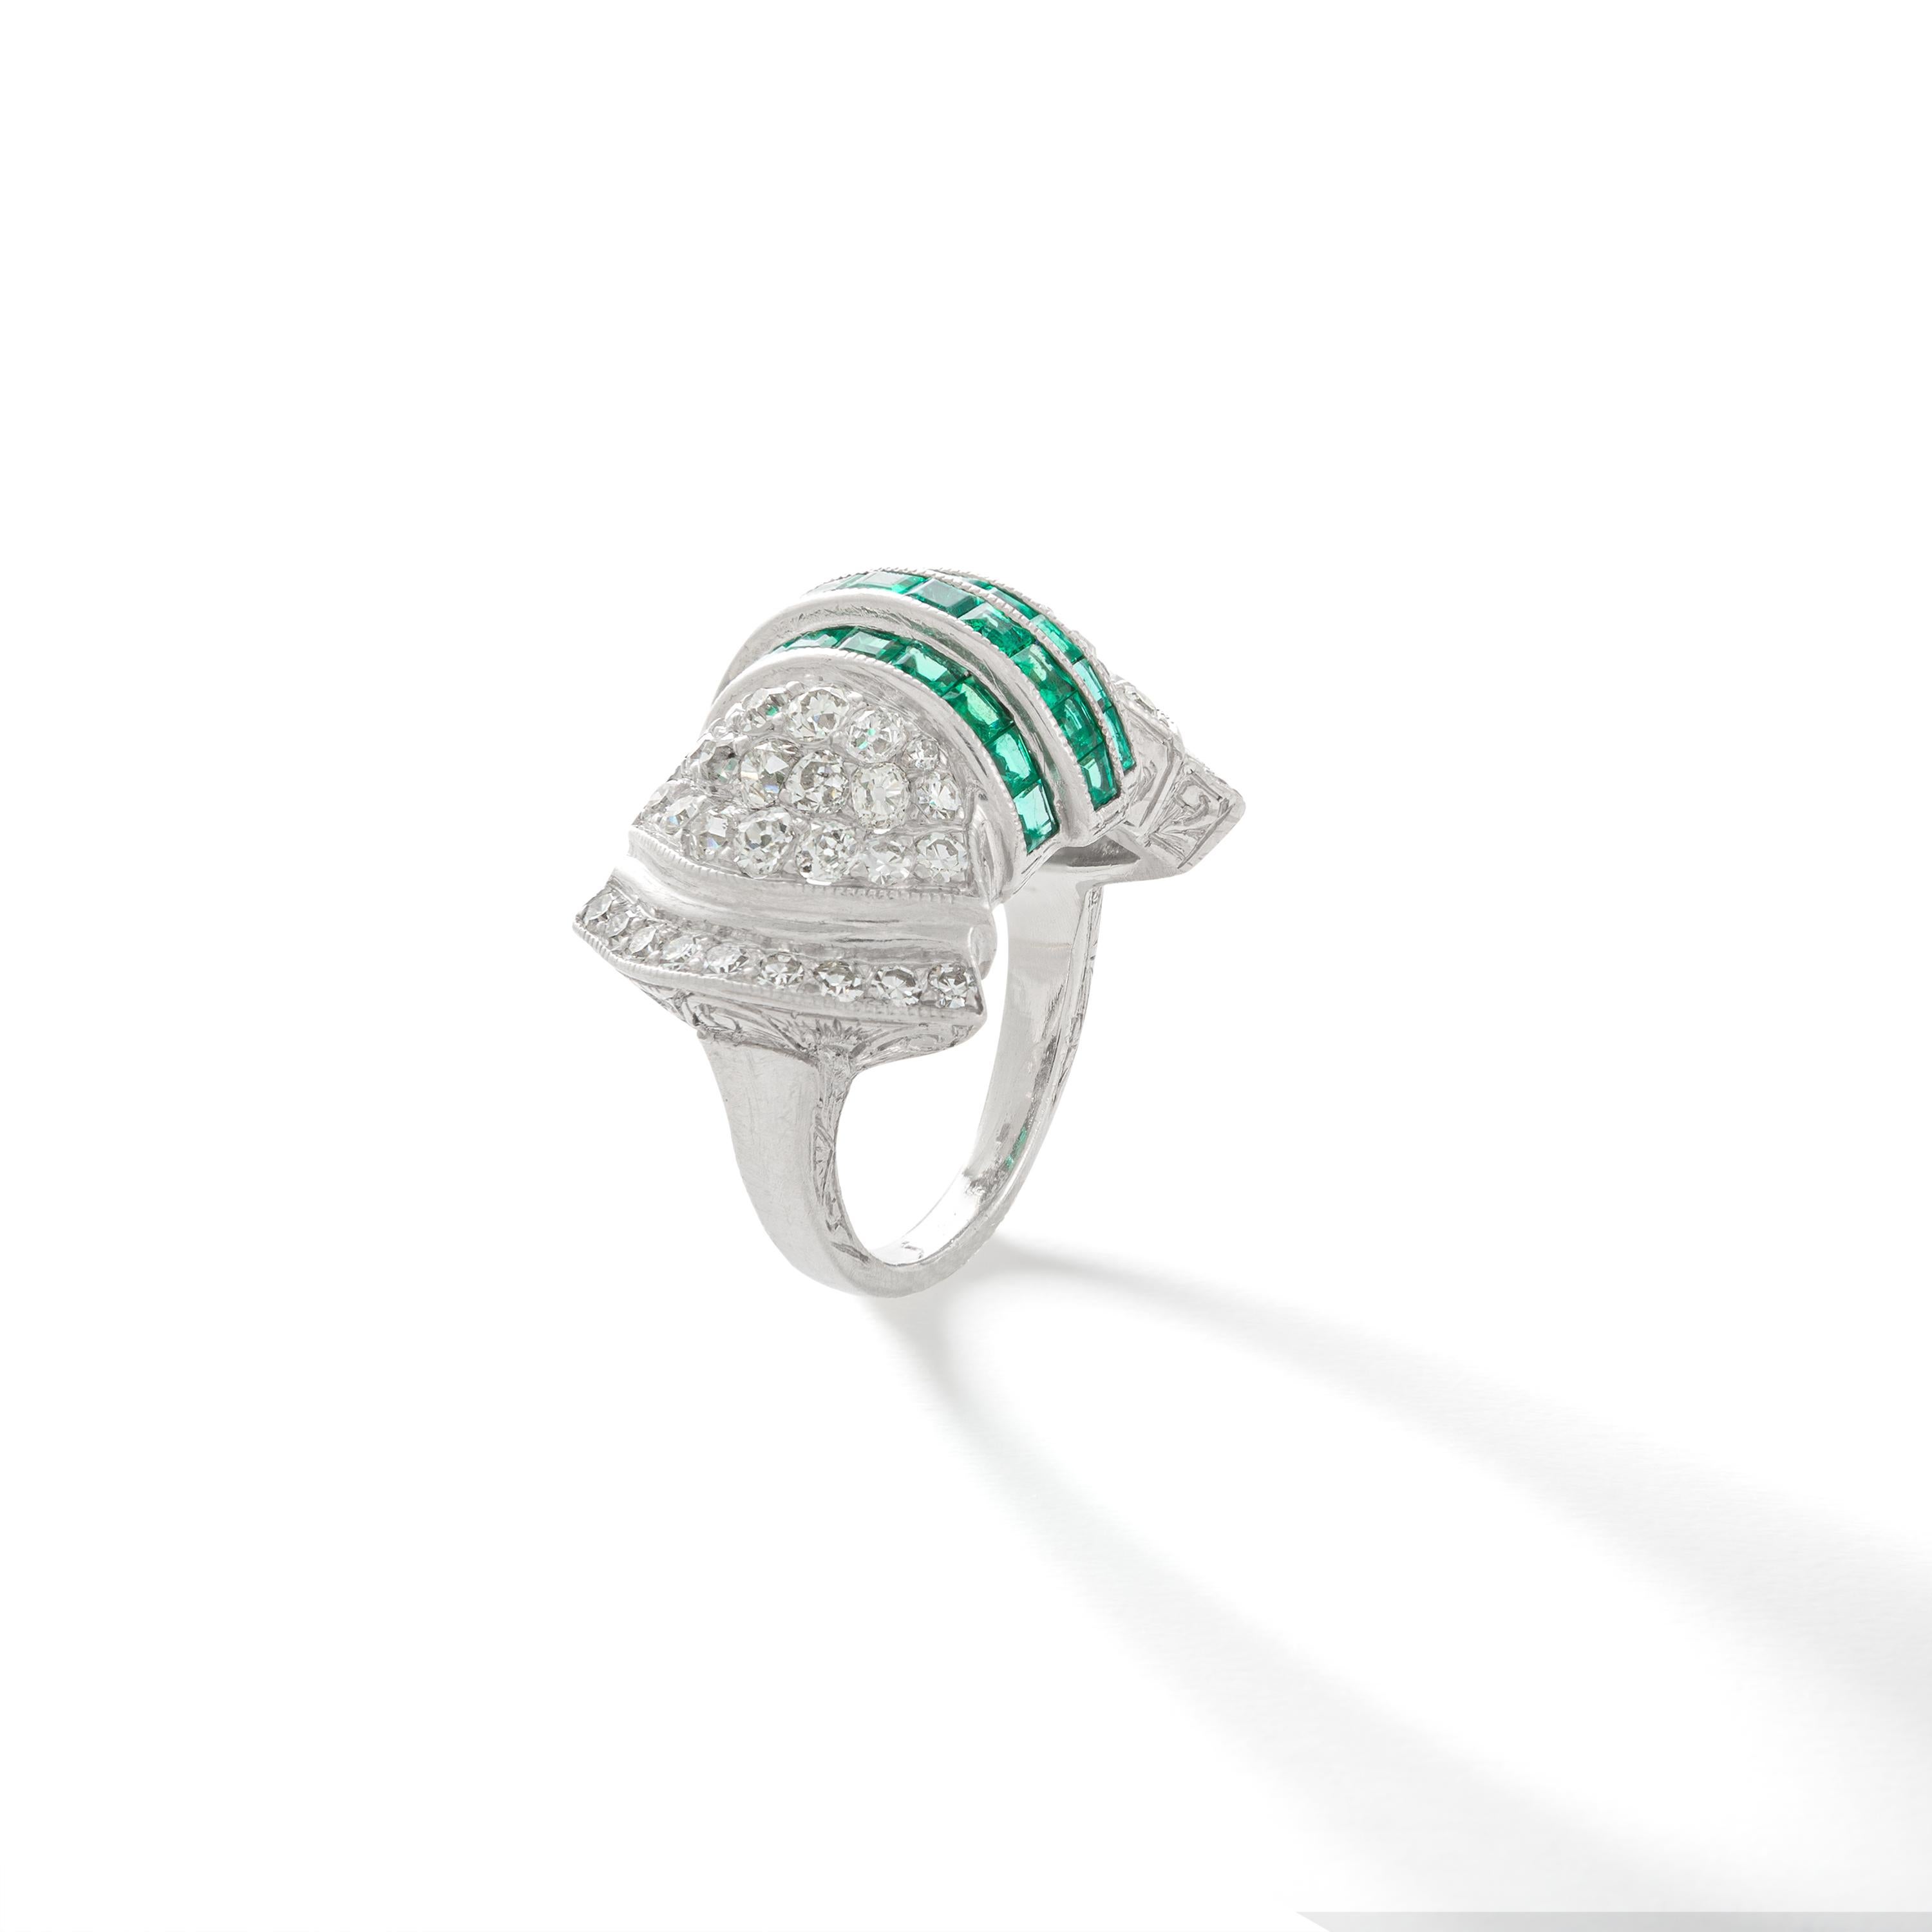 The beauty of Art Deco design is perennially fashionable. Here is the perfect proof.
Calibrated Emerald mounted on platinum shouldered by diamond. 
The sides and bottom are engraved.

Total diamond weight: approximately 2.00 carats

Ring size: 5 1/2.